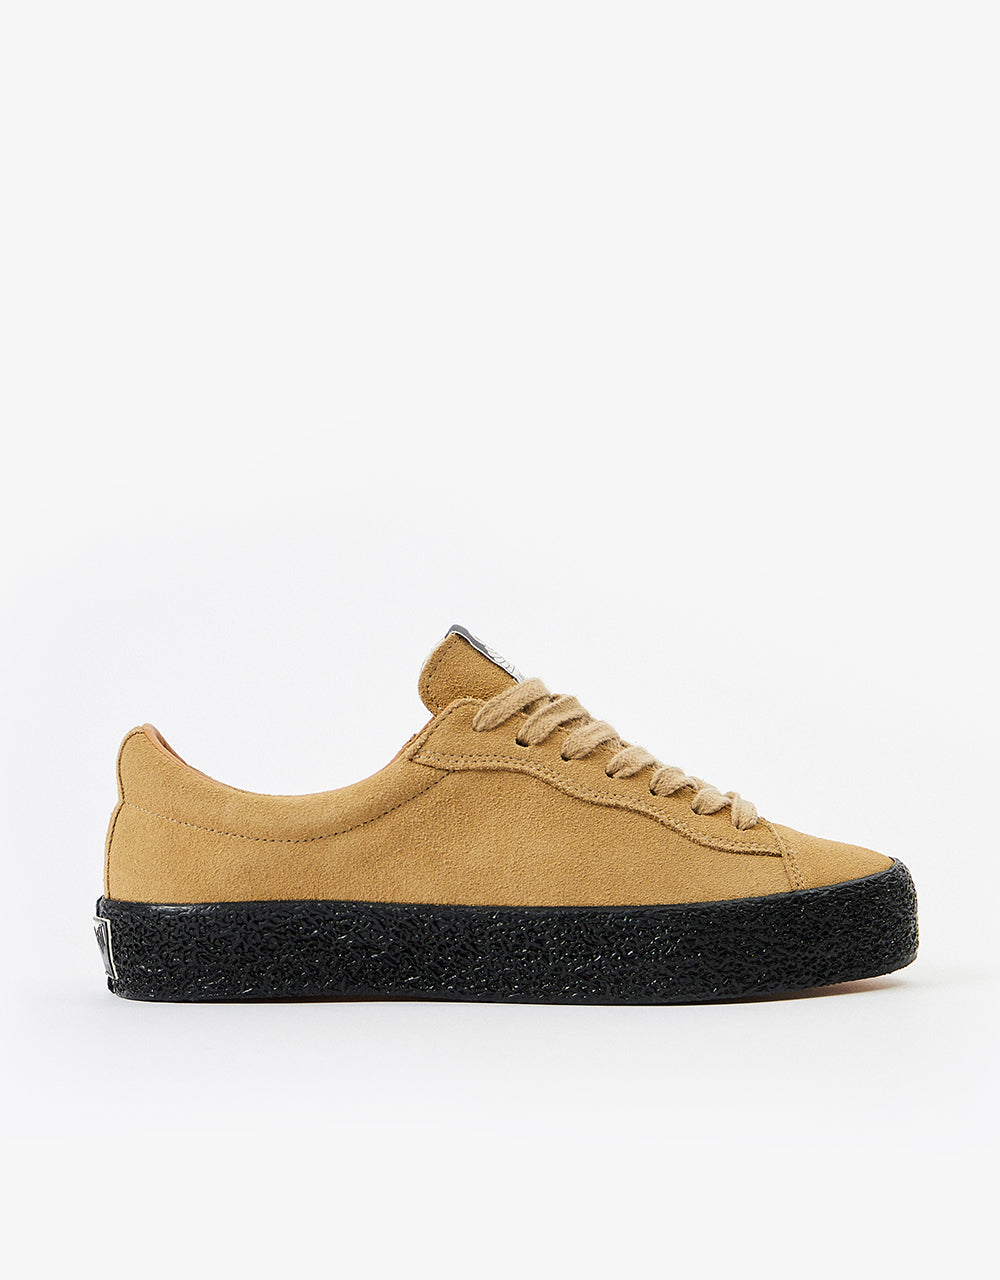 Last Resort AB VM002 Suede Skate Shoes - Sand/Black – Route One